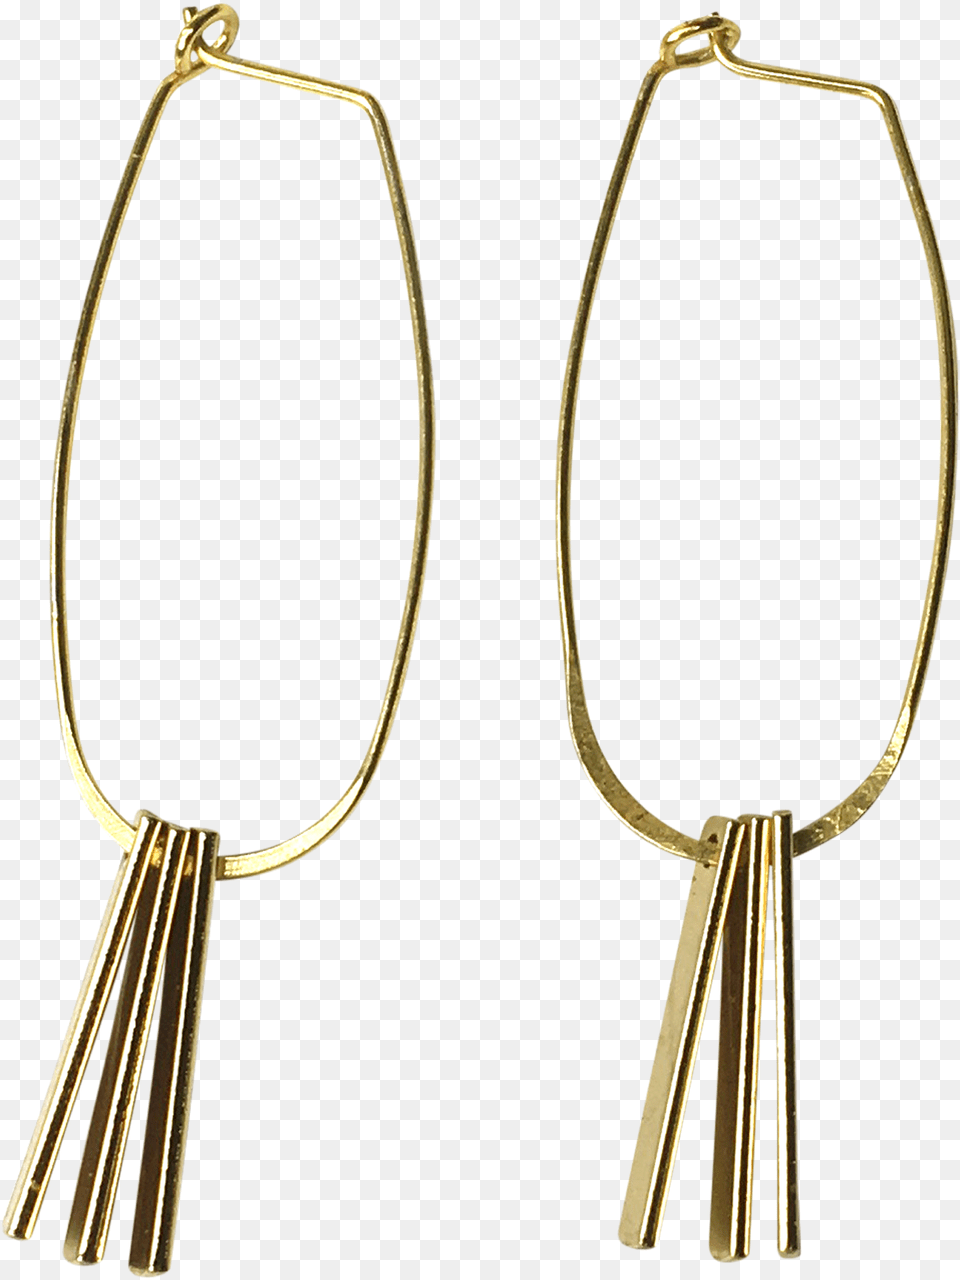 Earrings, Accessories, Earring, Jewelry, Necklace Png